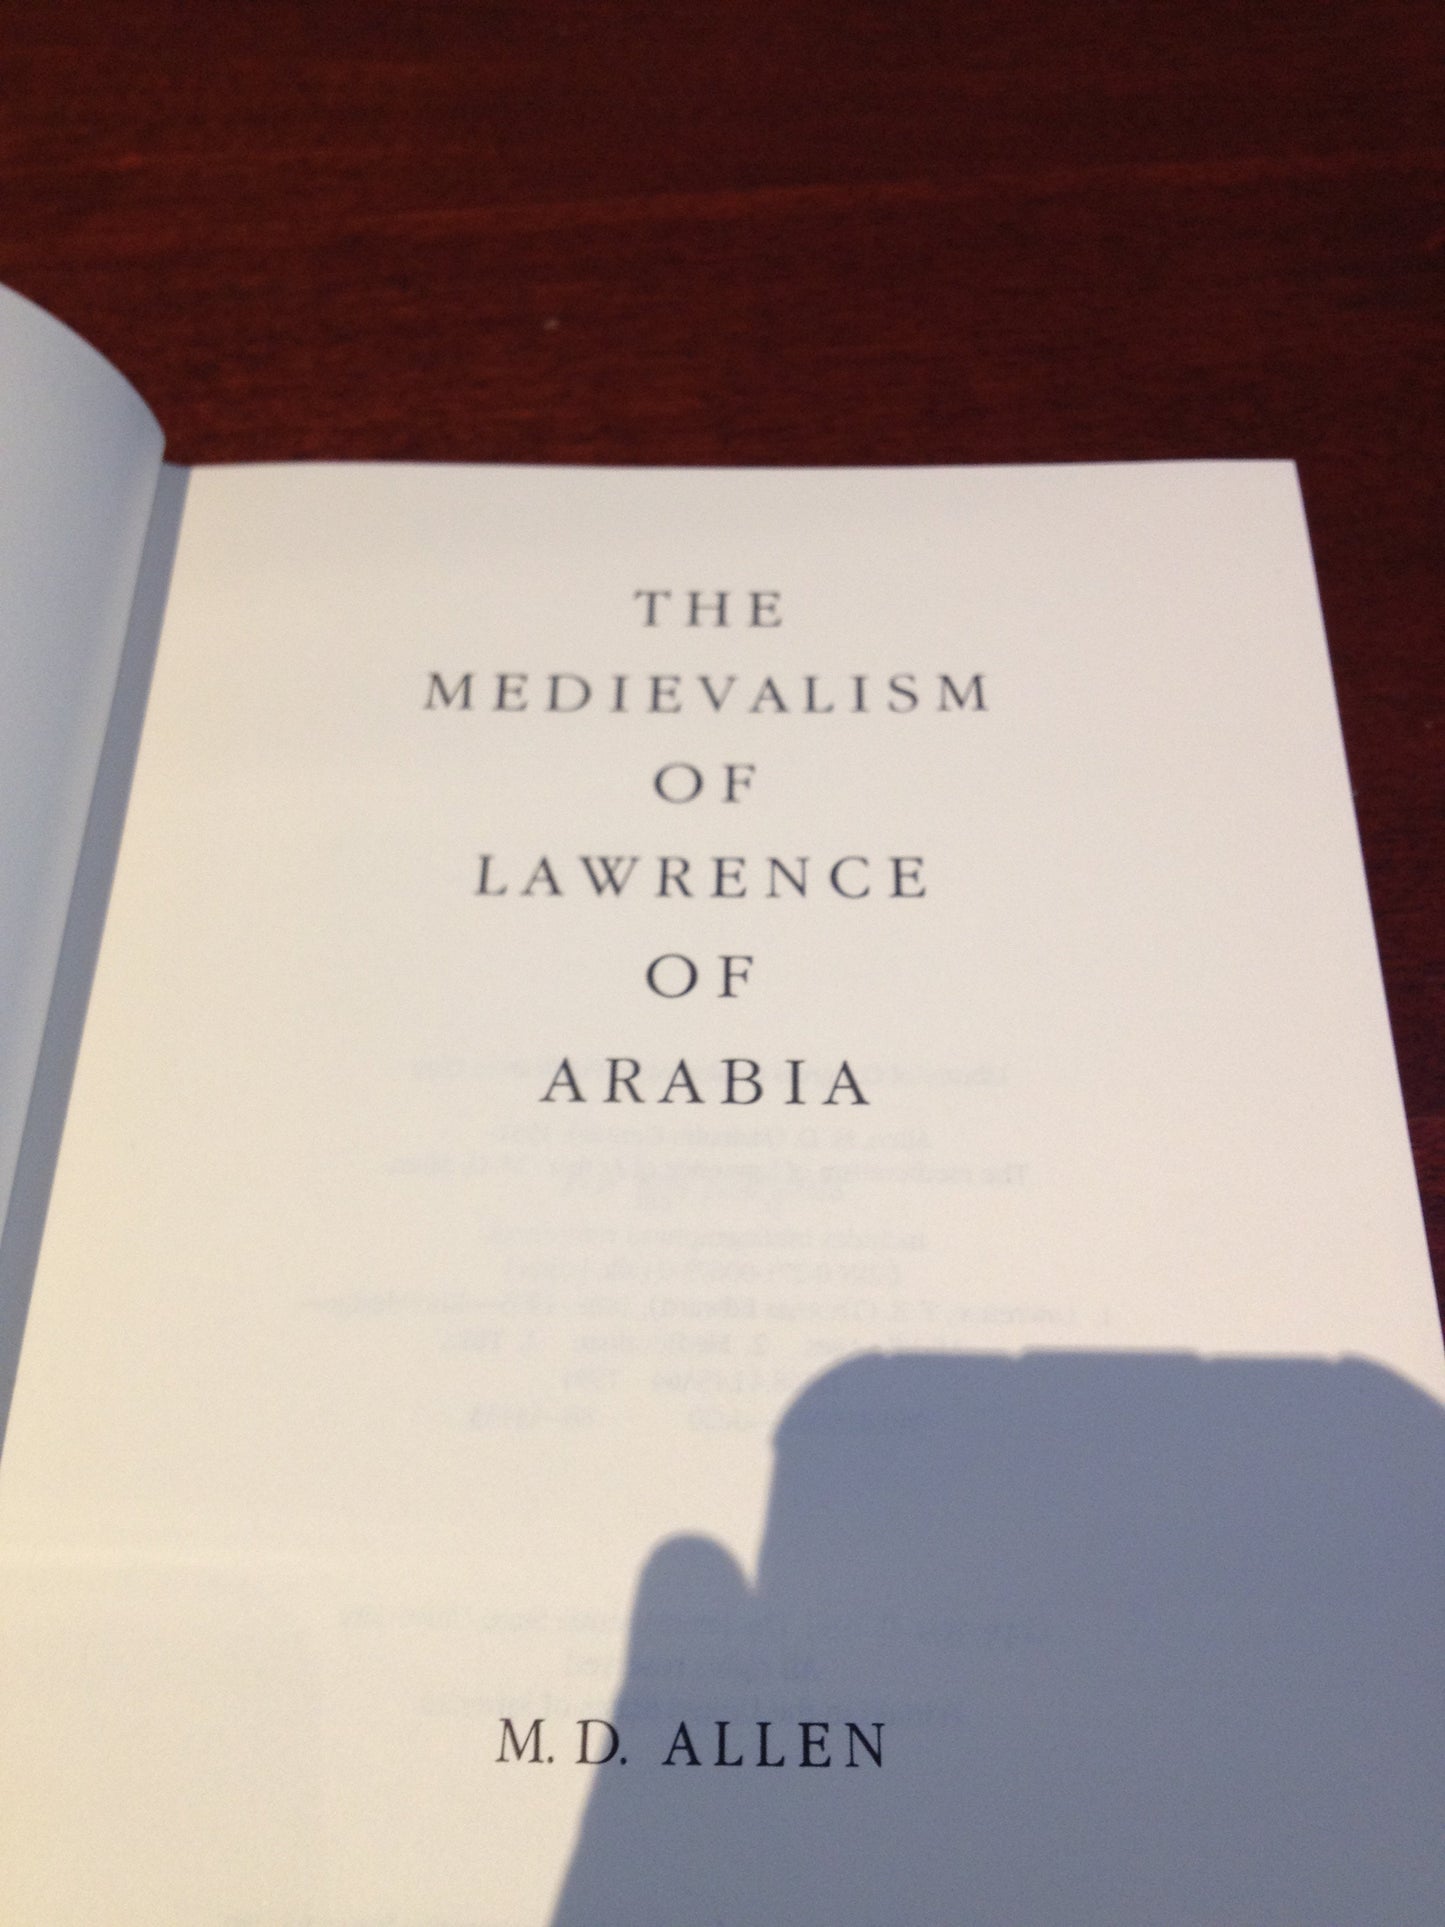 THE MEDIEVALISM OF LAWRENCE OF ARABIA  BY: M.D. ALLEN BooksCardsNBikes